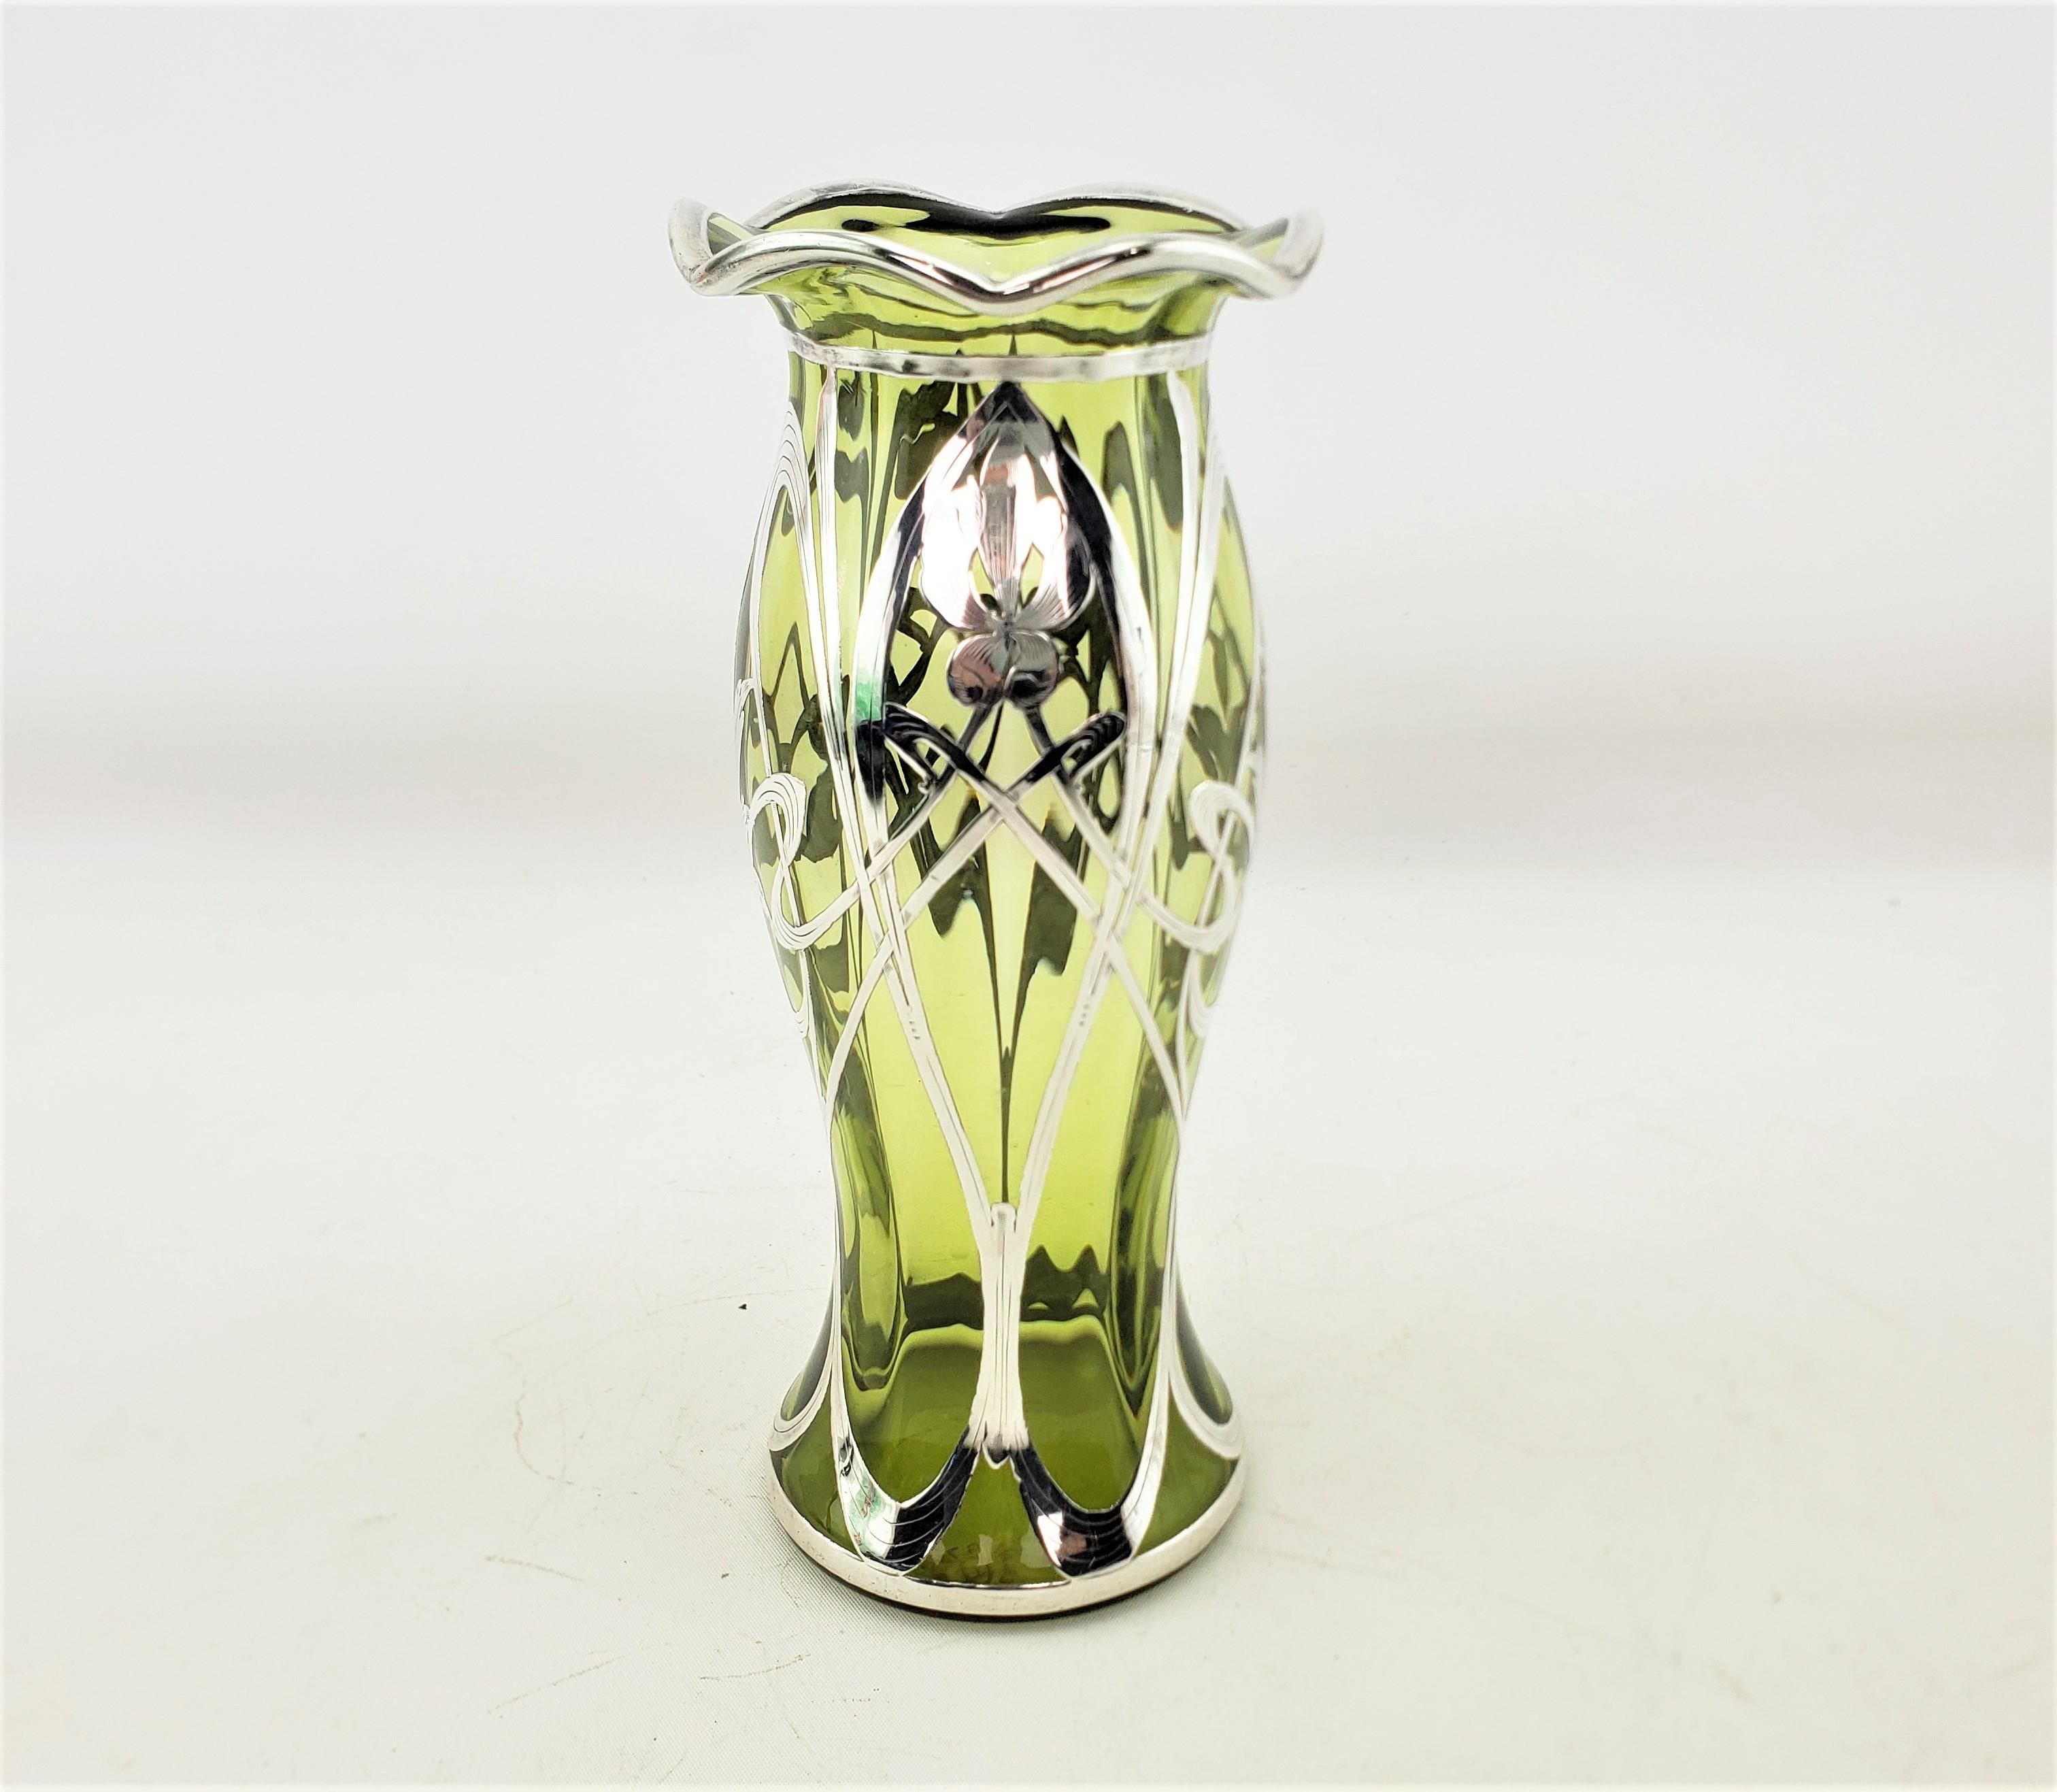 This antique vase is unsigned, but presumed to originate from Austria and date to approximately 1900 and done in the period Art Nouveau style. The vase is composed of a pale green art glass vase with a pie crust edged rim and silver overlay